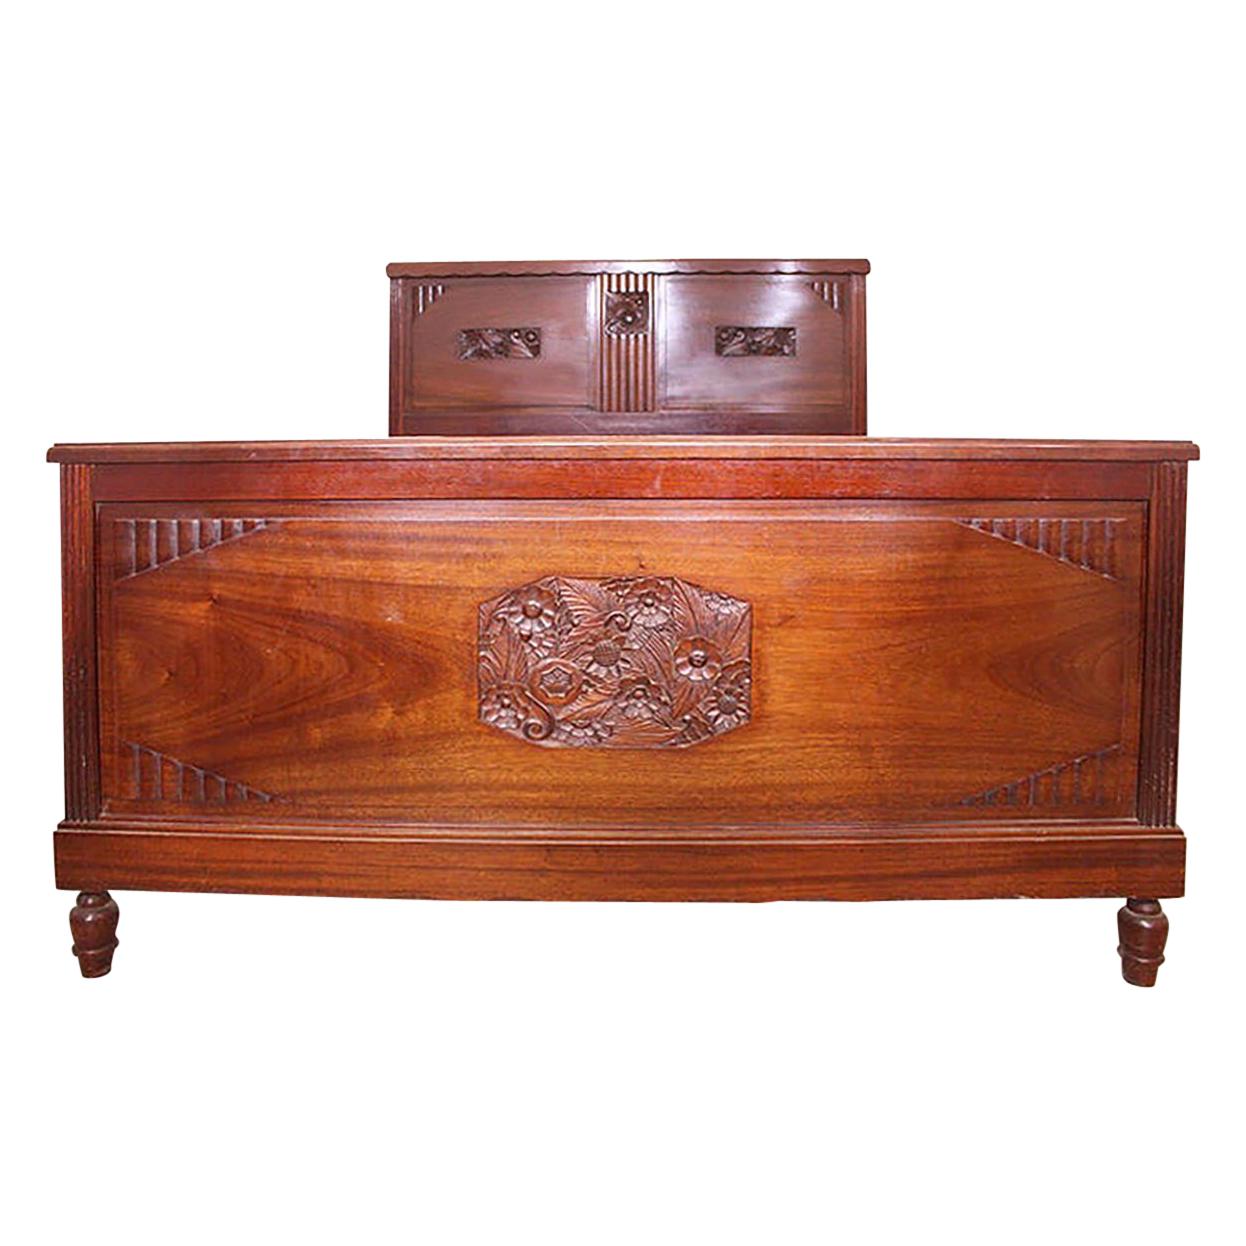 French Art Deco Bed US Queen UK King Size Mahogany, circa 1930